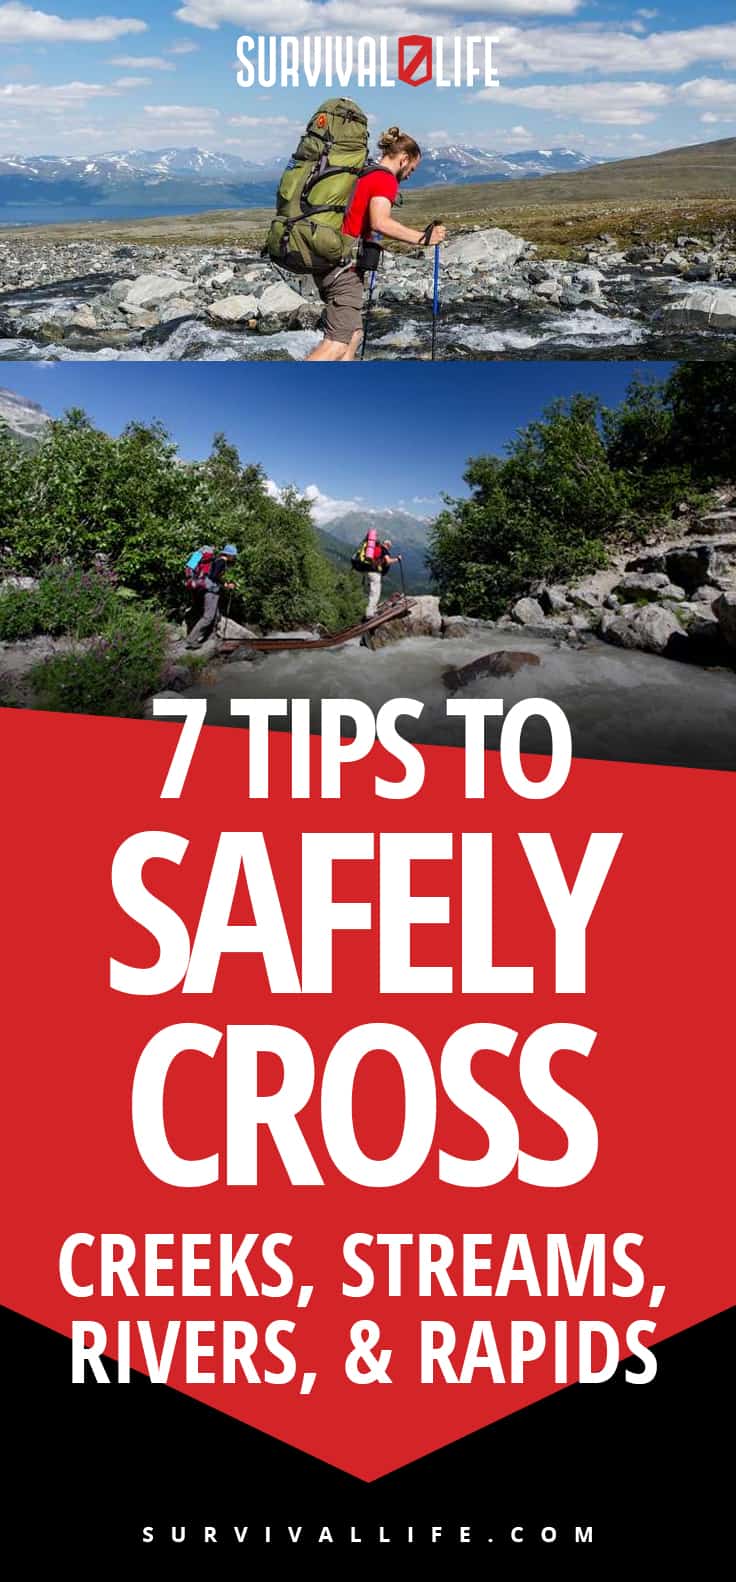 7 Tips To Safely Cross Creeks, Streams, Rivers, and Rapids